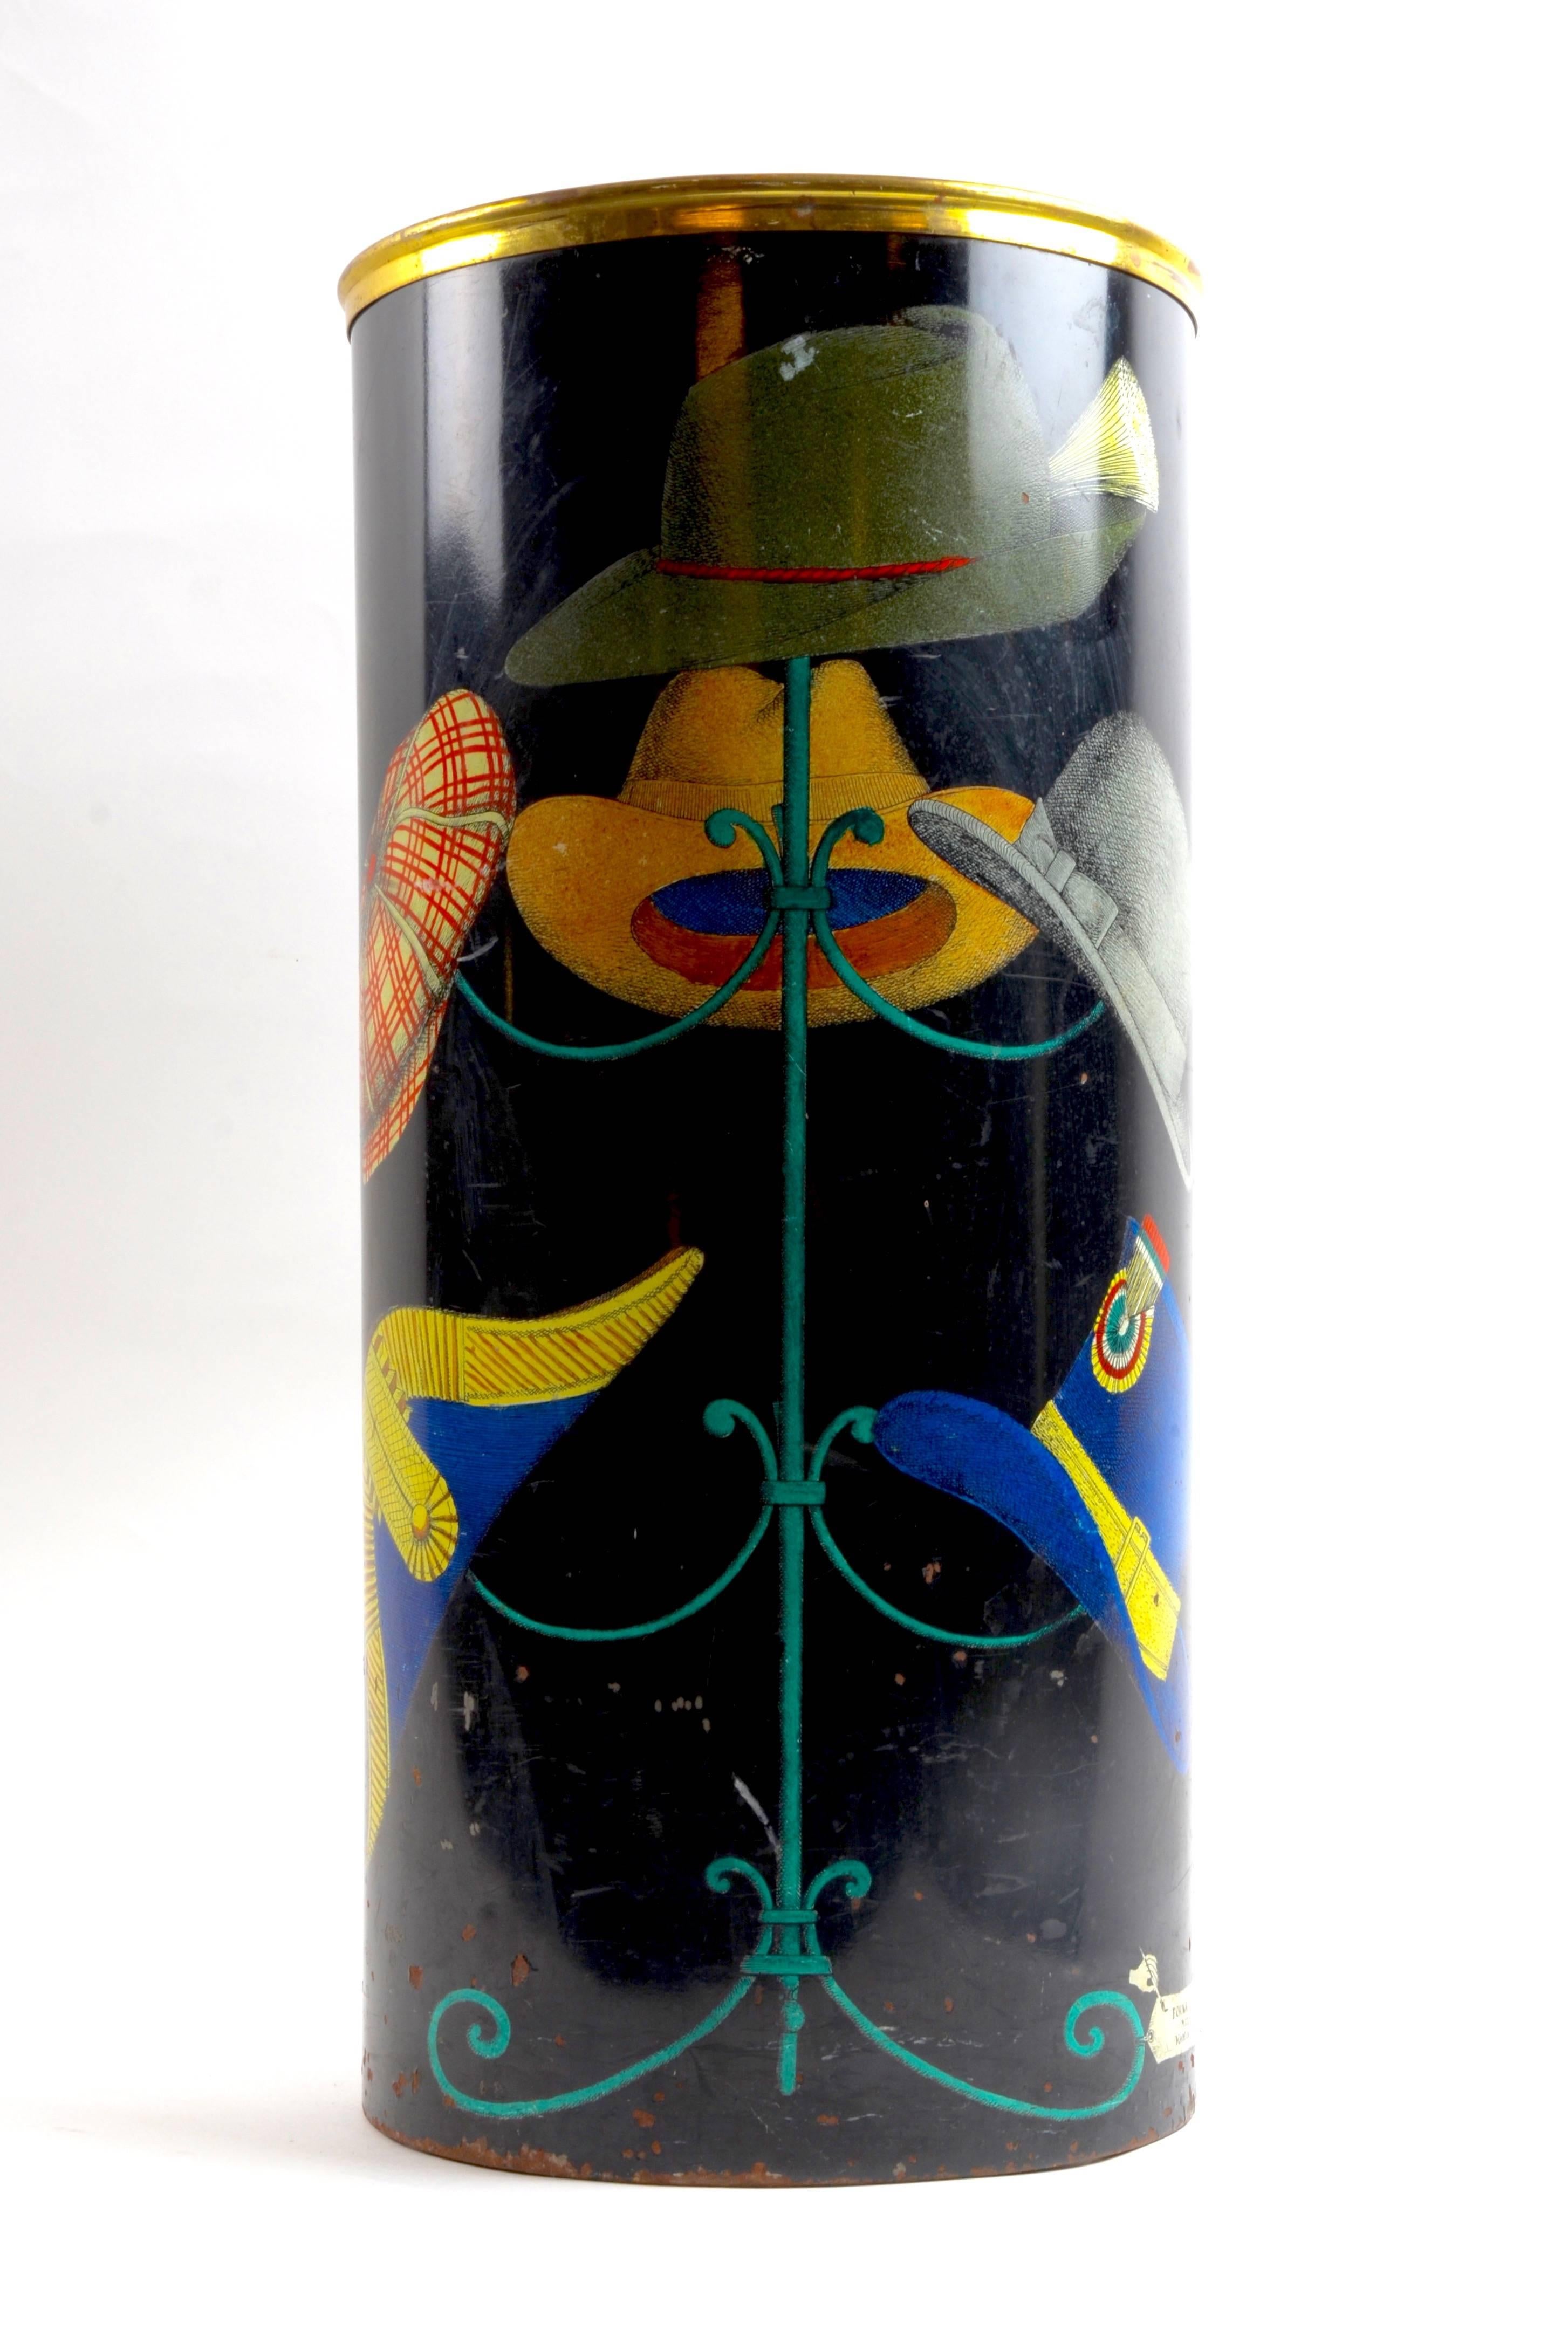 Umbrella Stand designed By Piero Fornasetti, 1950s. Motif of hats in brass, lacquered and lithographic transfer over Masonite board.

Printed label with early Fornasetti mark and hand with paintbrush which reads: Fornasetti Milano made in Italy.